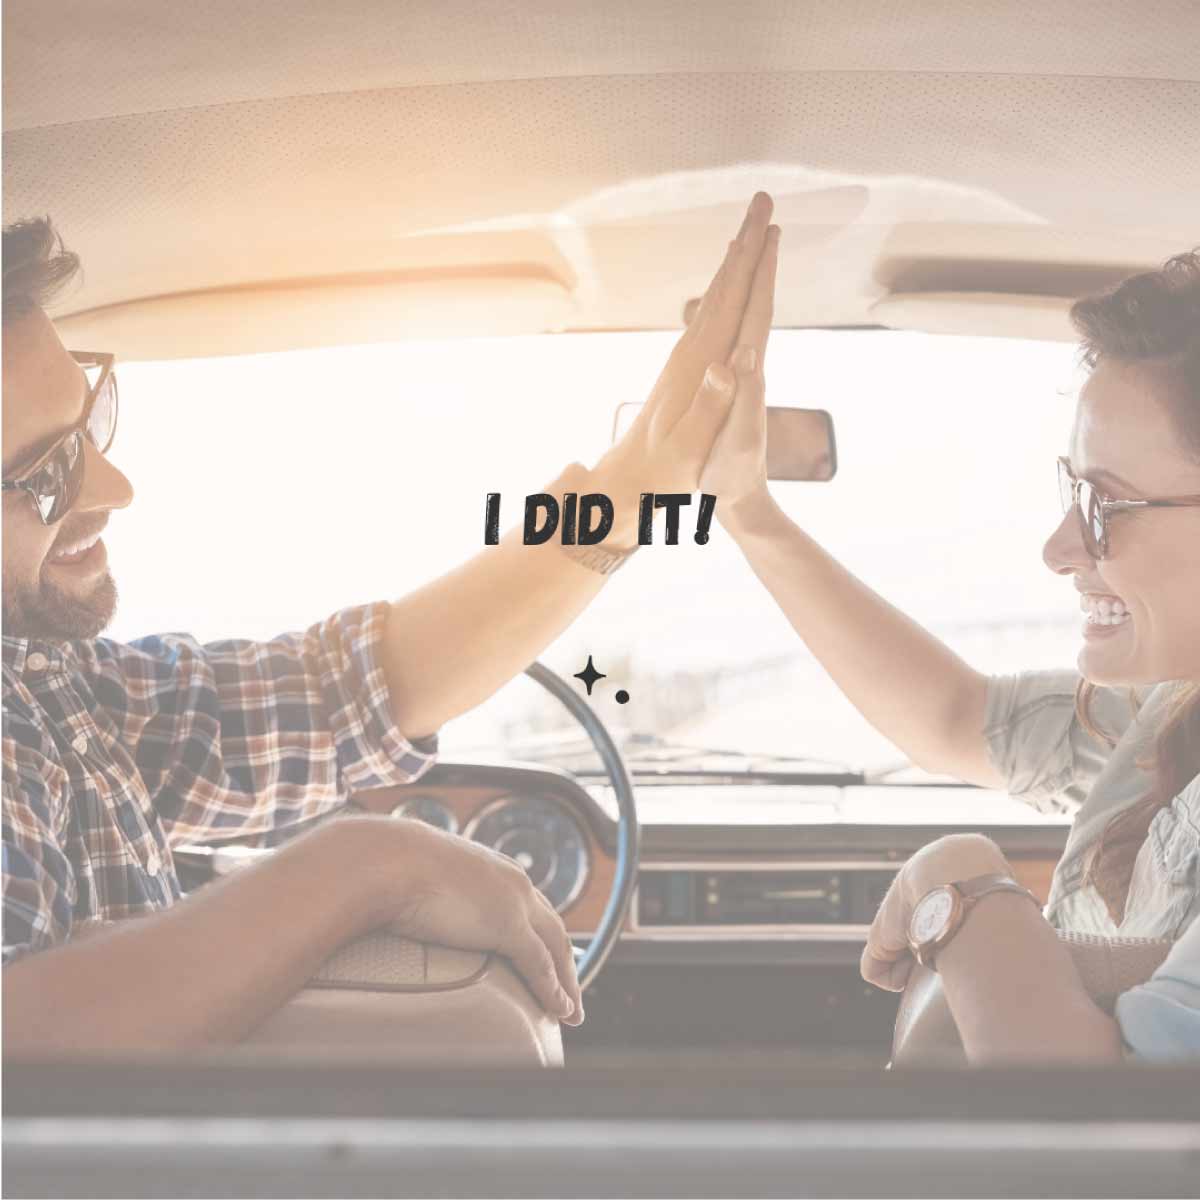 I did it! A man and a woman sitting in the front seats of a car giving each other a high five.